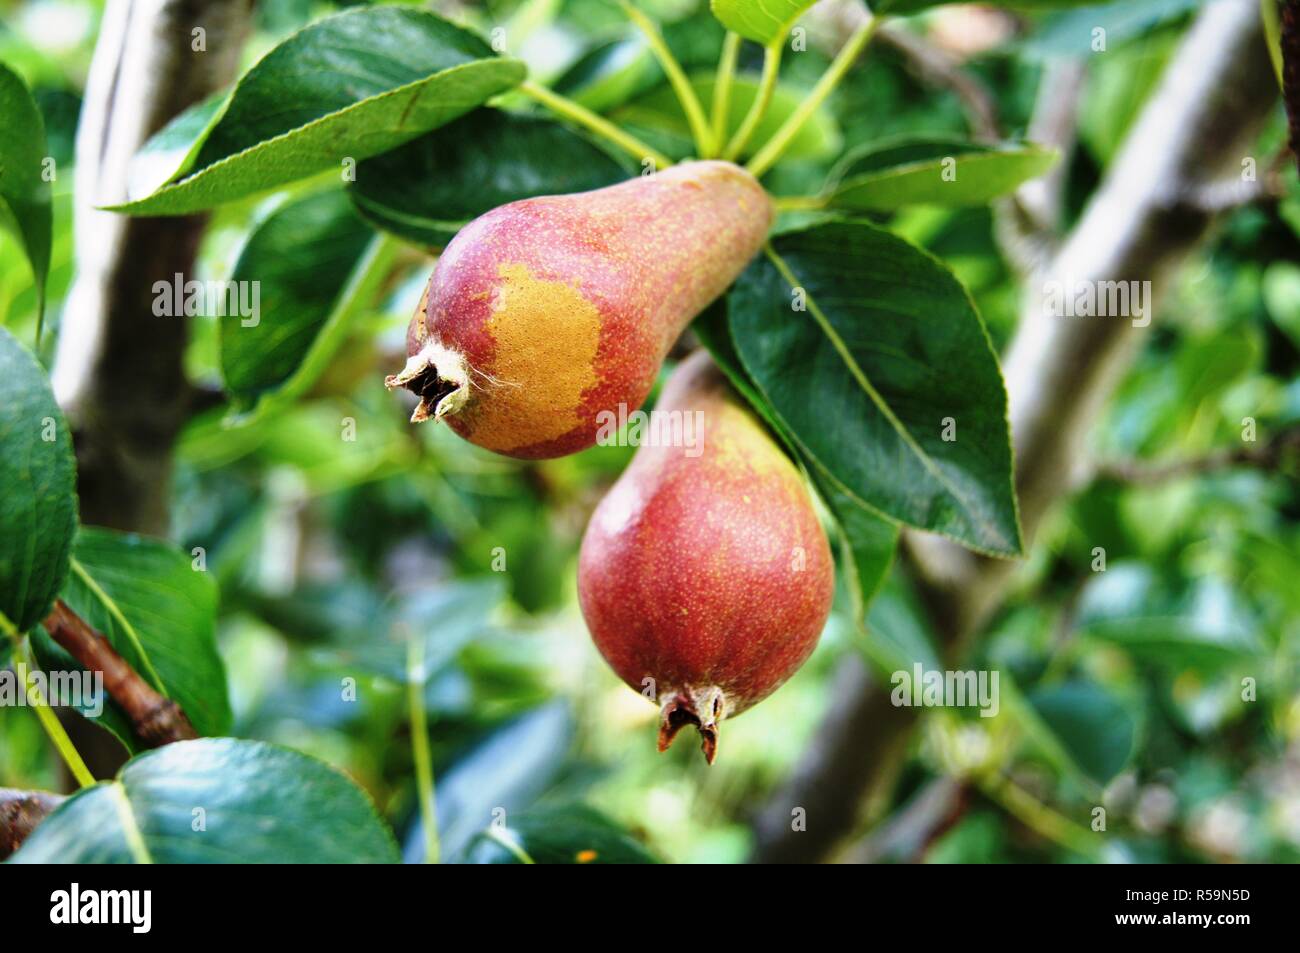 red william christ pear in growth Stock Photo